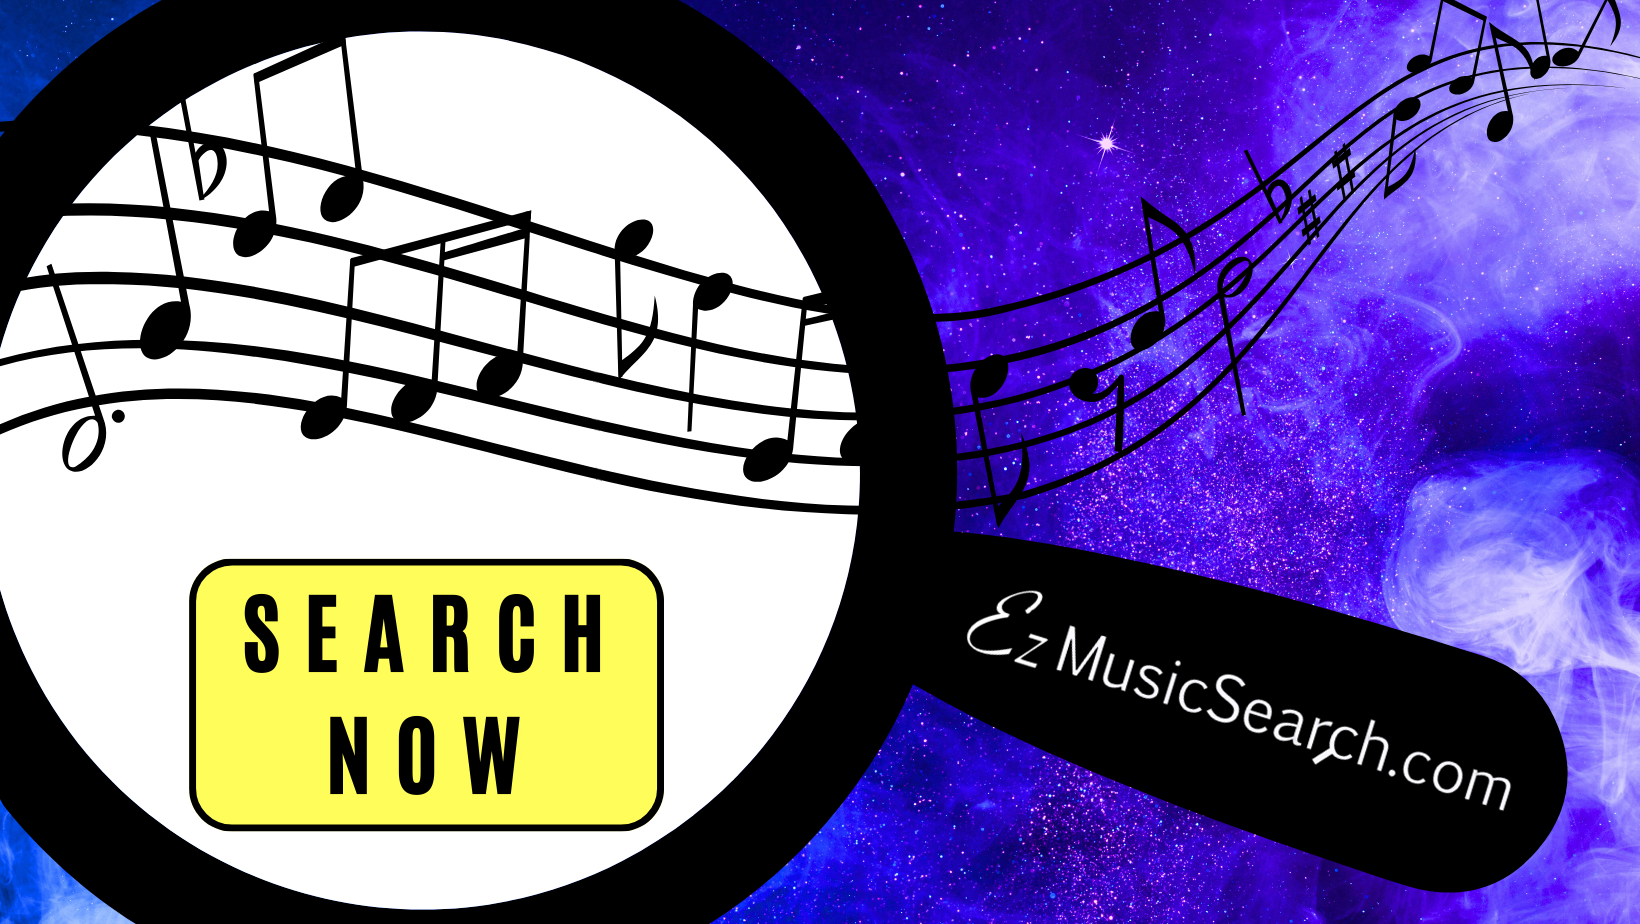 EZ Music Search helps you find the right contest music